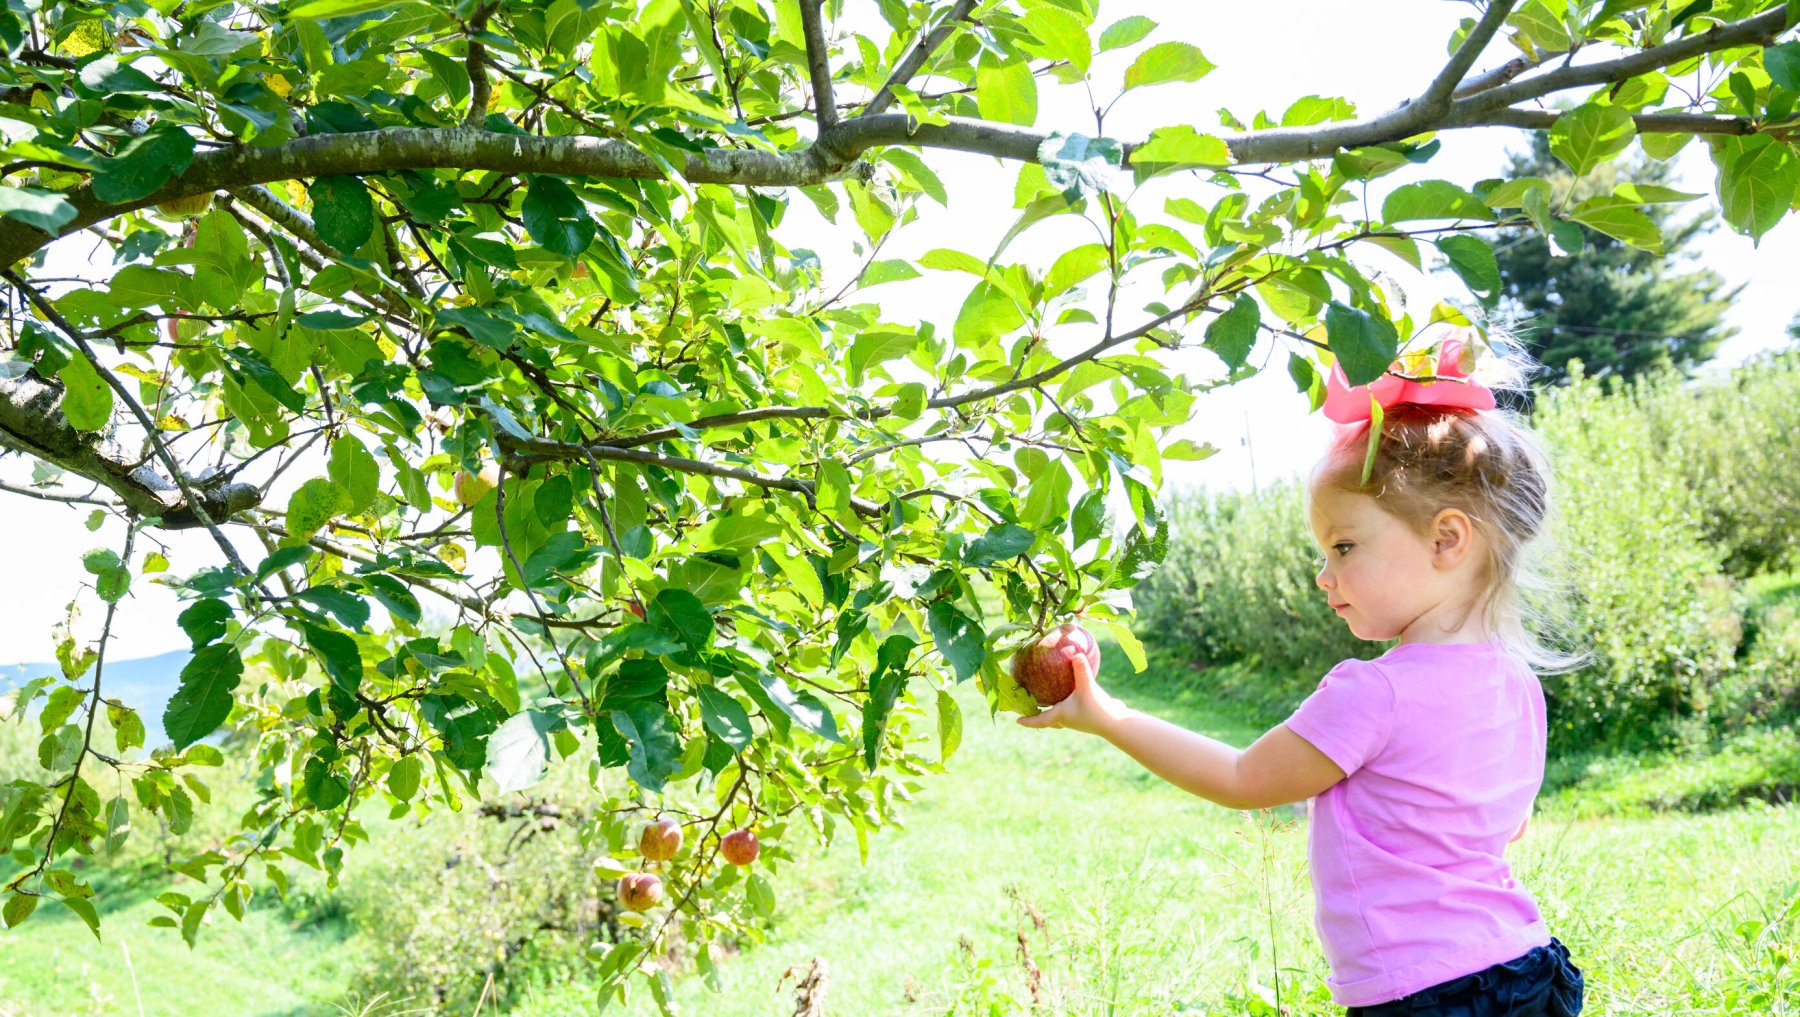 A child picking apples from a tree